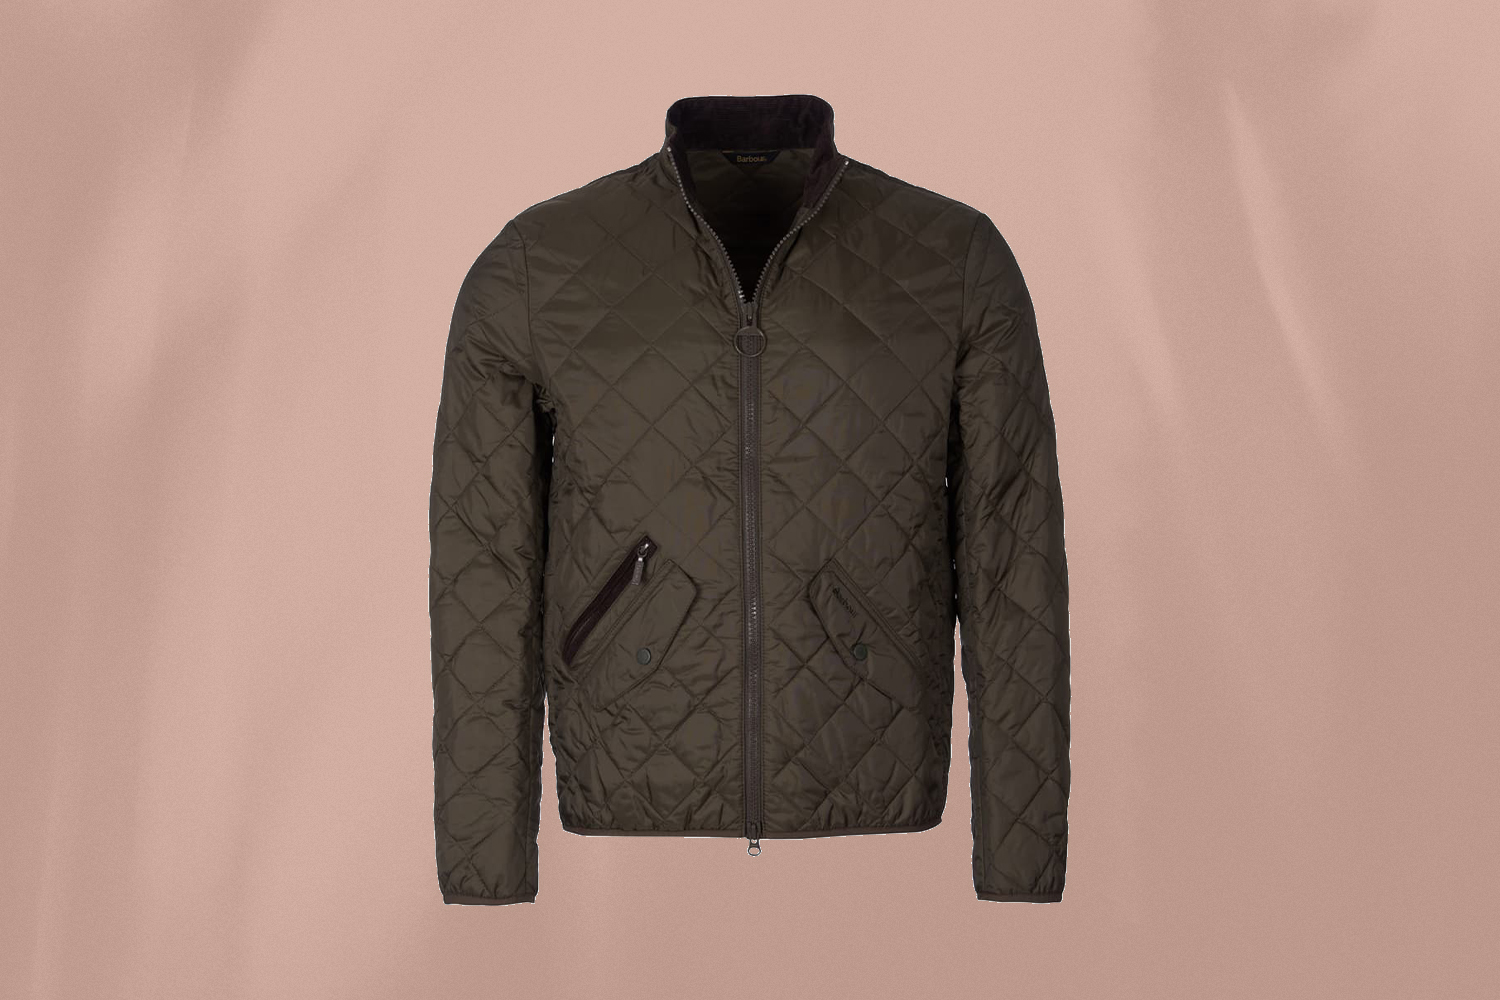 Deal: This Quilted Barbour Jacket Is 60% Off